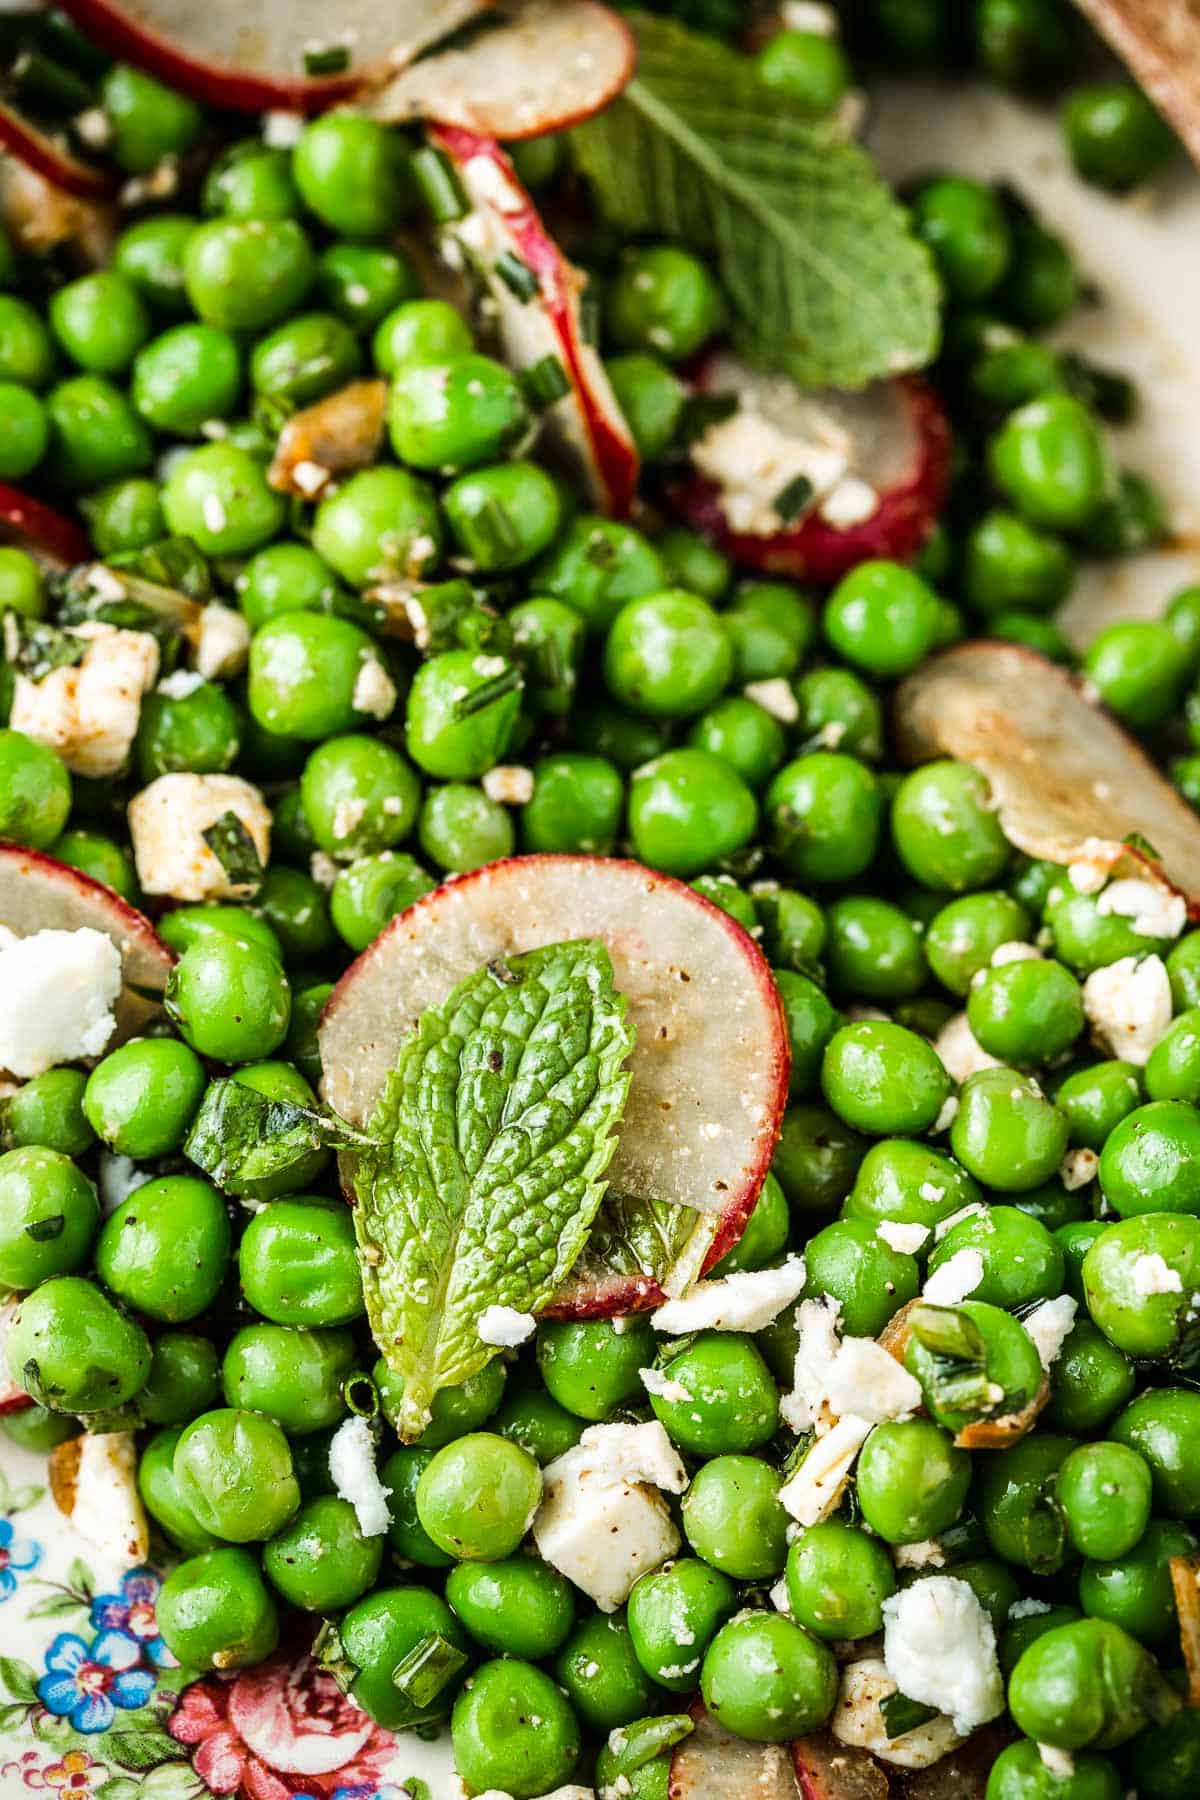 Snap Pea Salad With Feta and Radishes - Girl With The Iron Cast